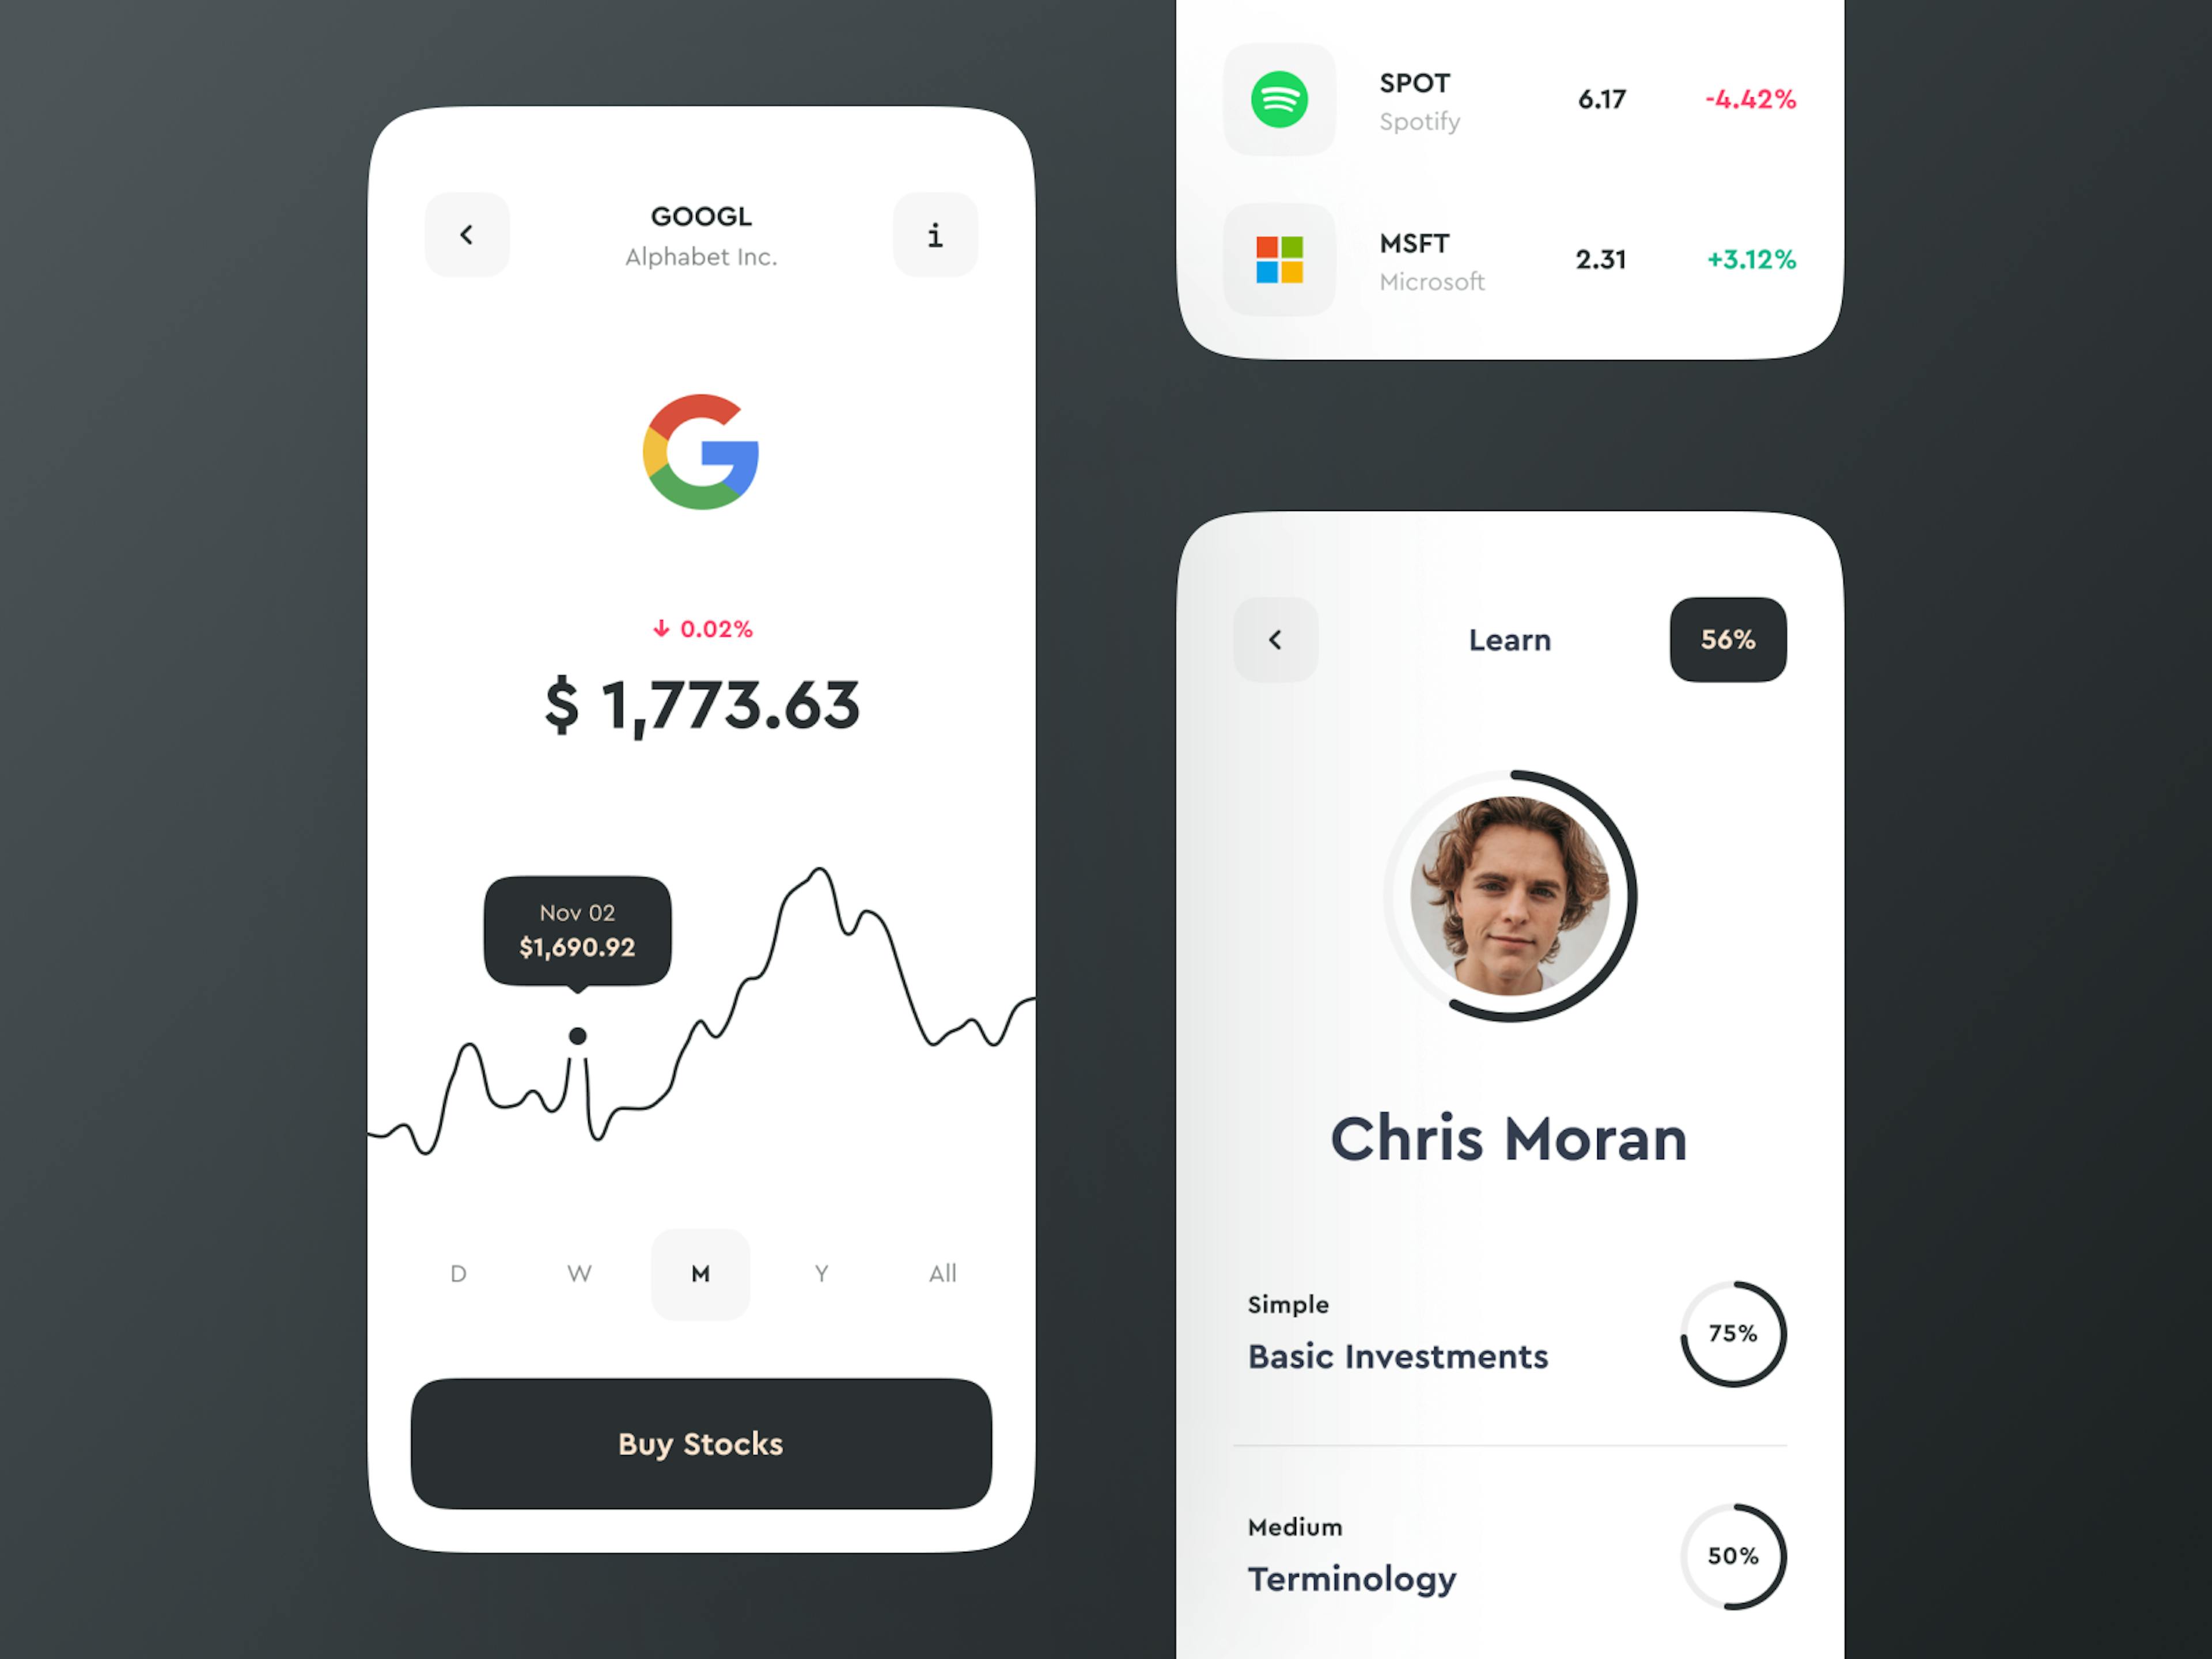 Source: https://dribbble.com/shots/14651304-Stock-Page-Profile-Progress-for-Investment-App/attachments/6346601?mode=media